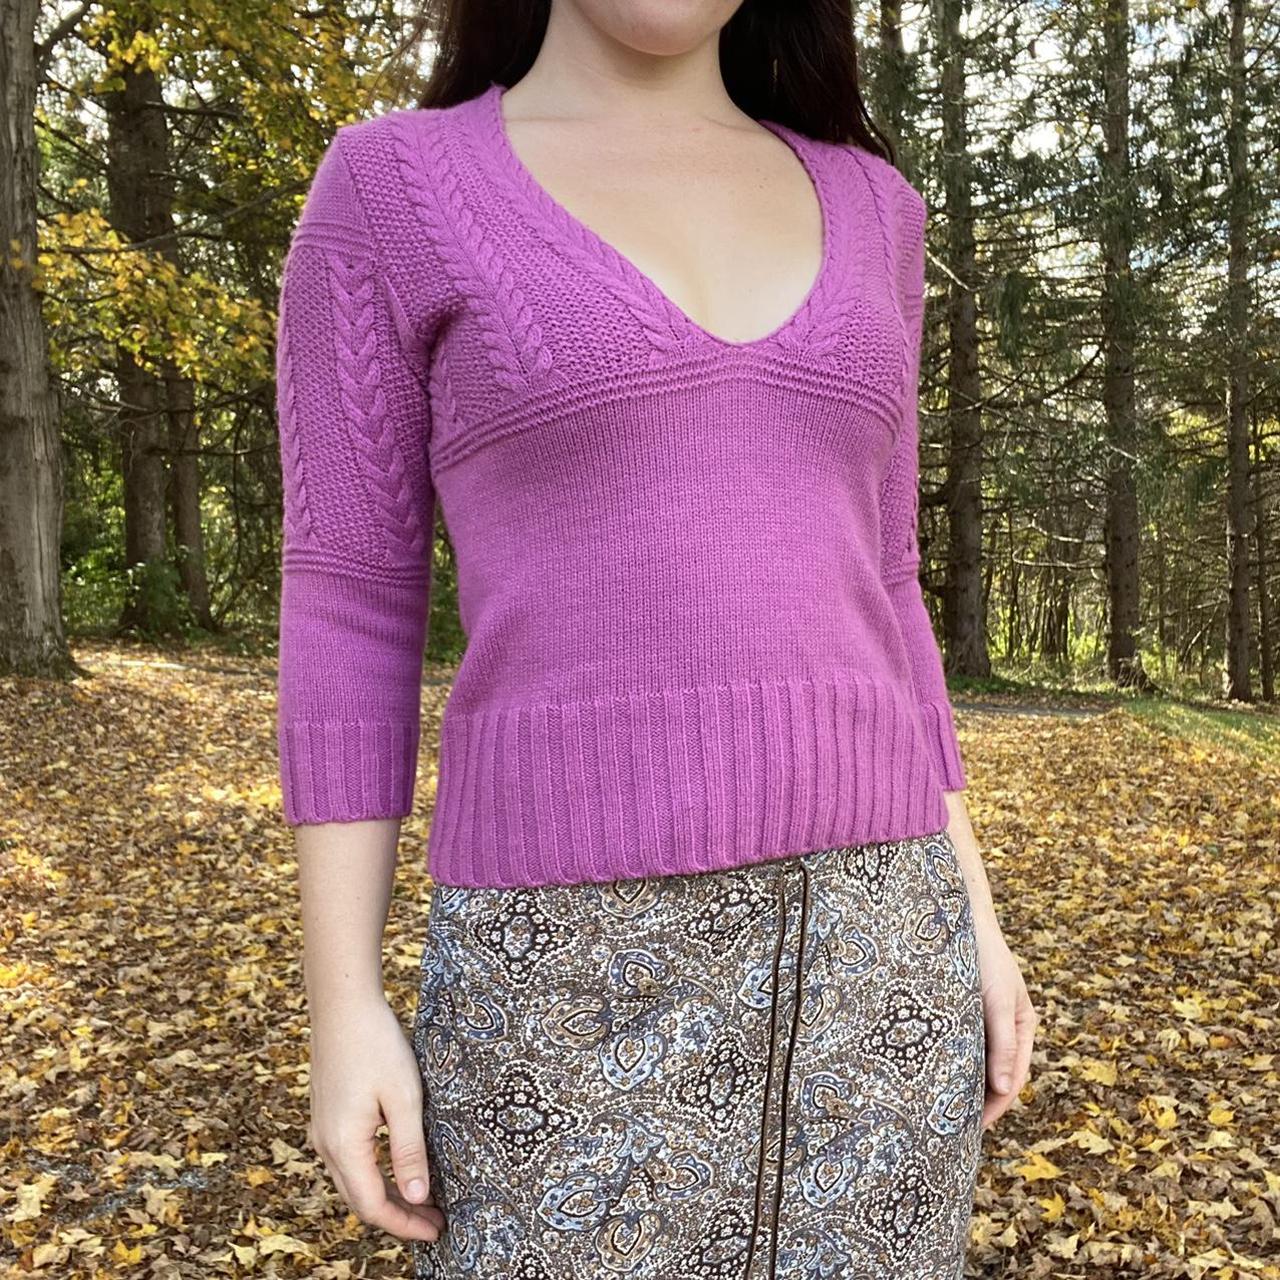 Product Image 1 - Ballerina Off-Duty Sweater

Cropped magenta knit

Size